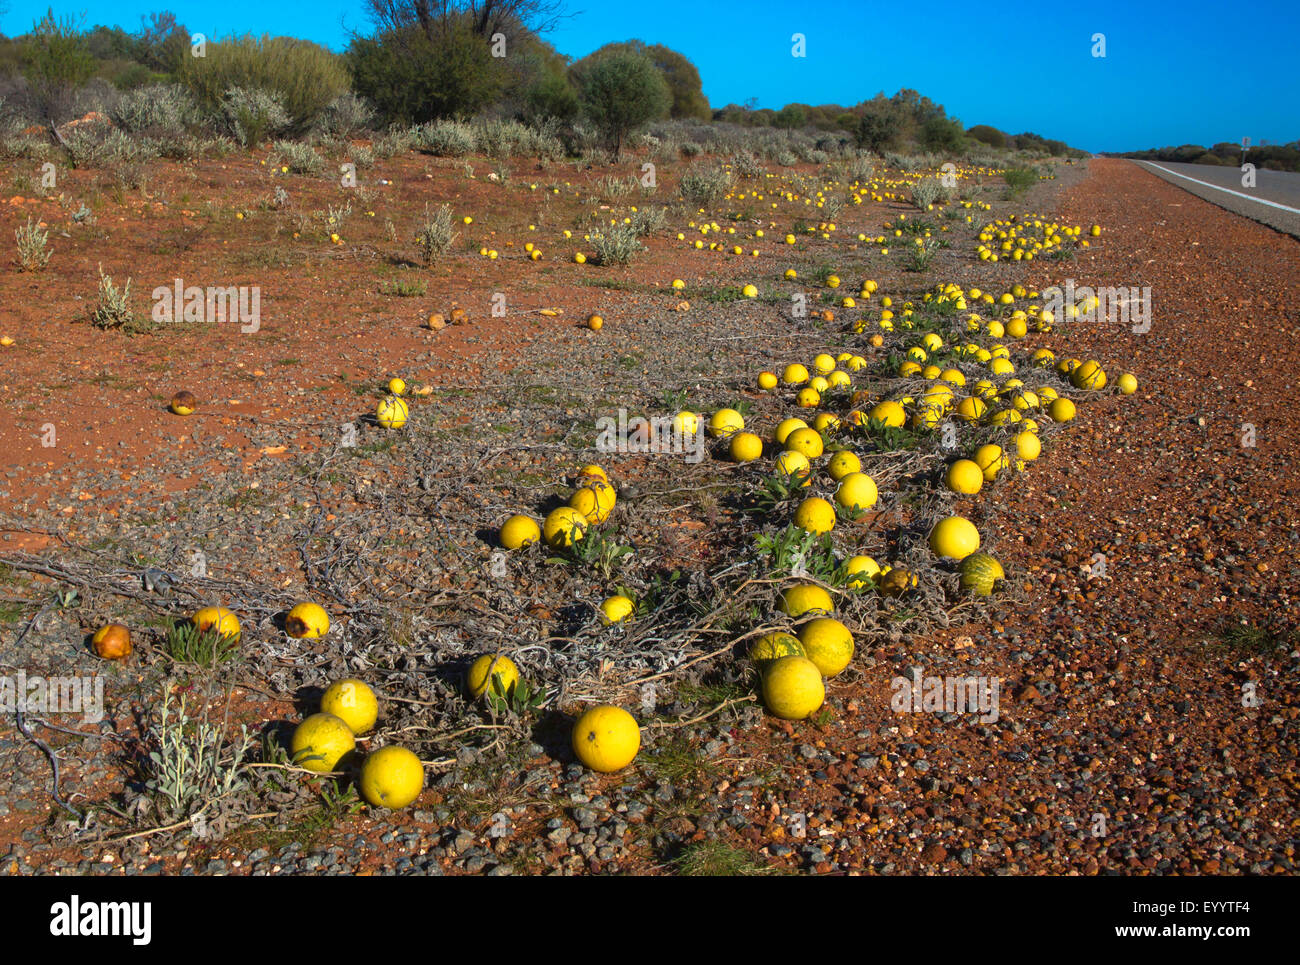 bitter apple, colocynth (Citrullus colocynthis), many fruits at a roadside, Australia, Western Australia, Mount Magnet Sandstone Road Stock Photo